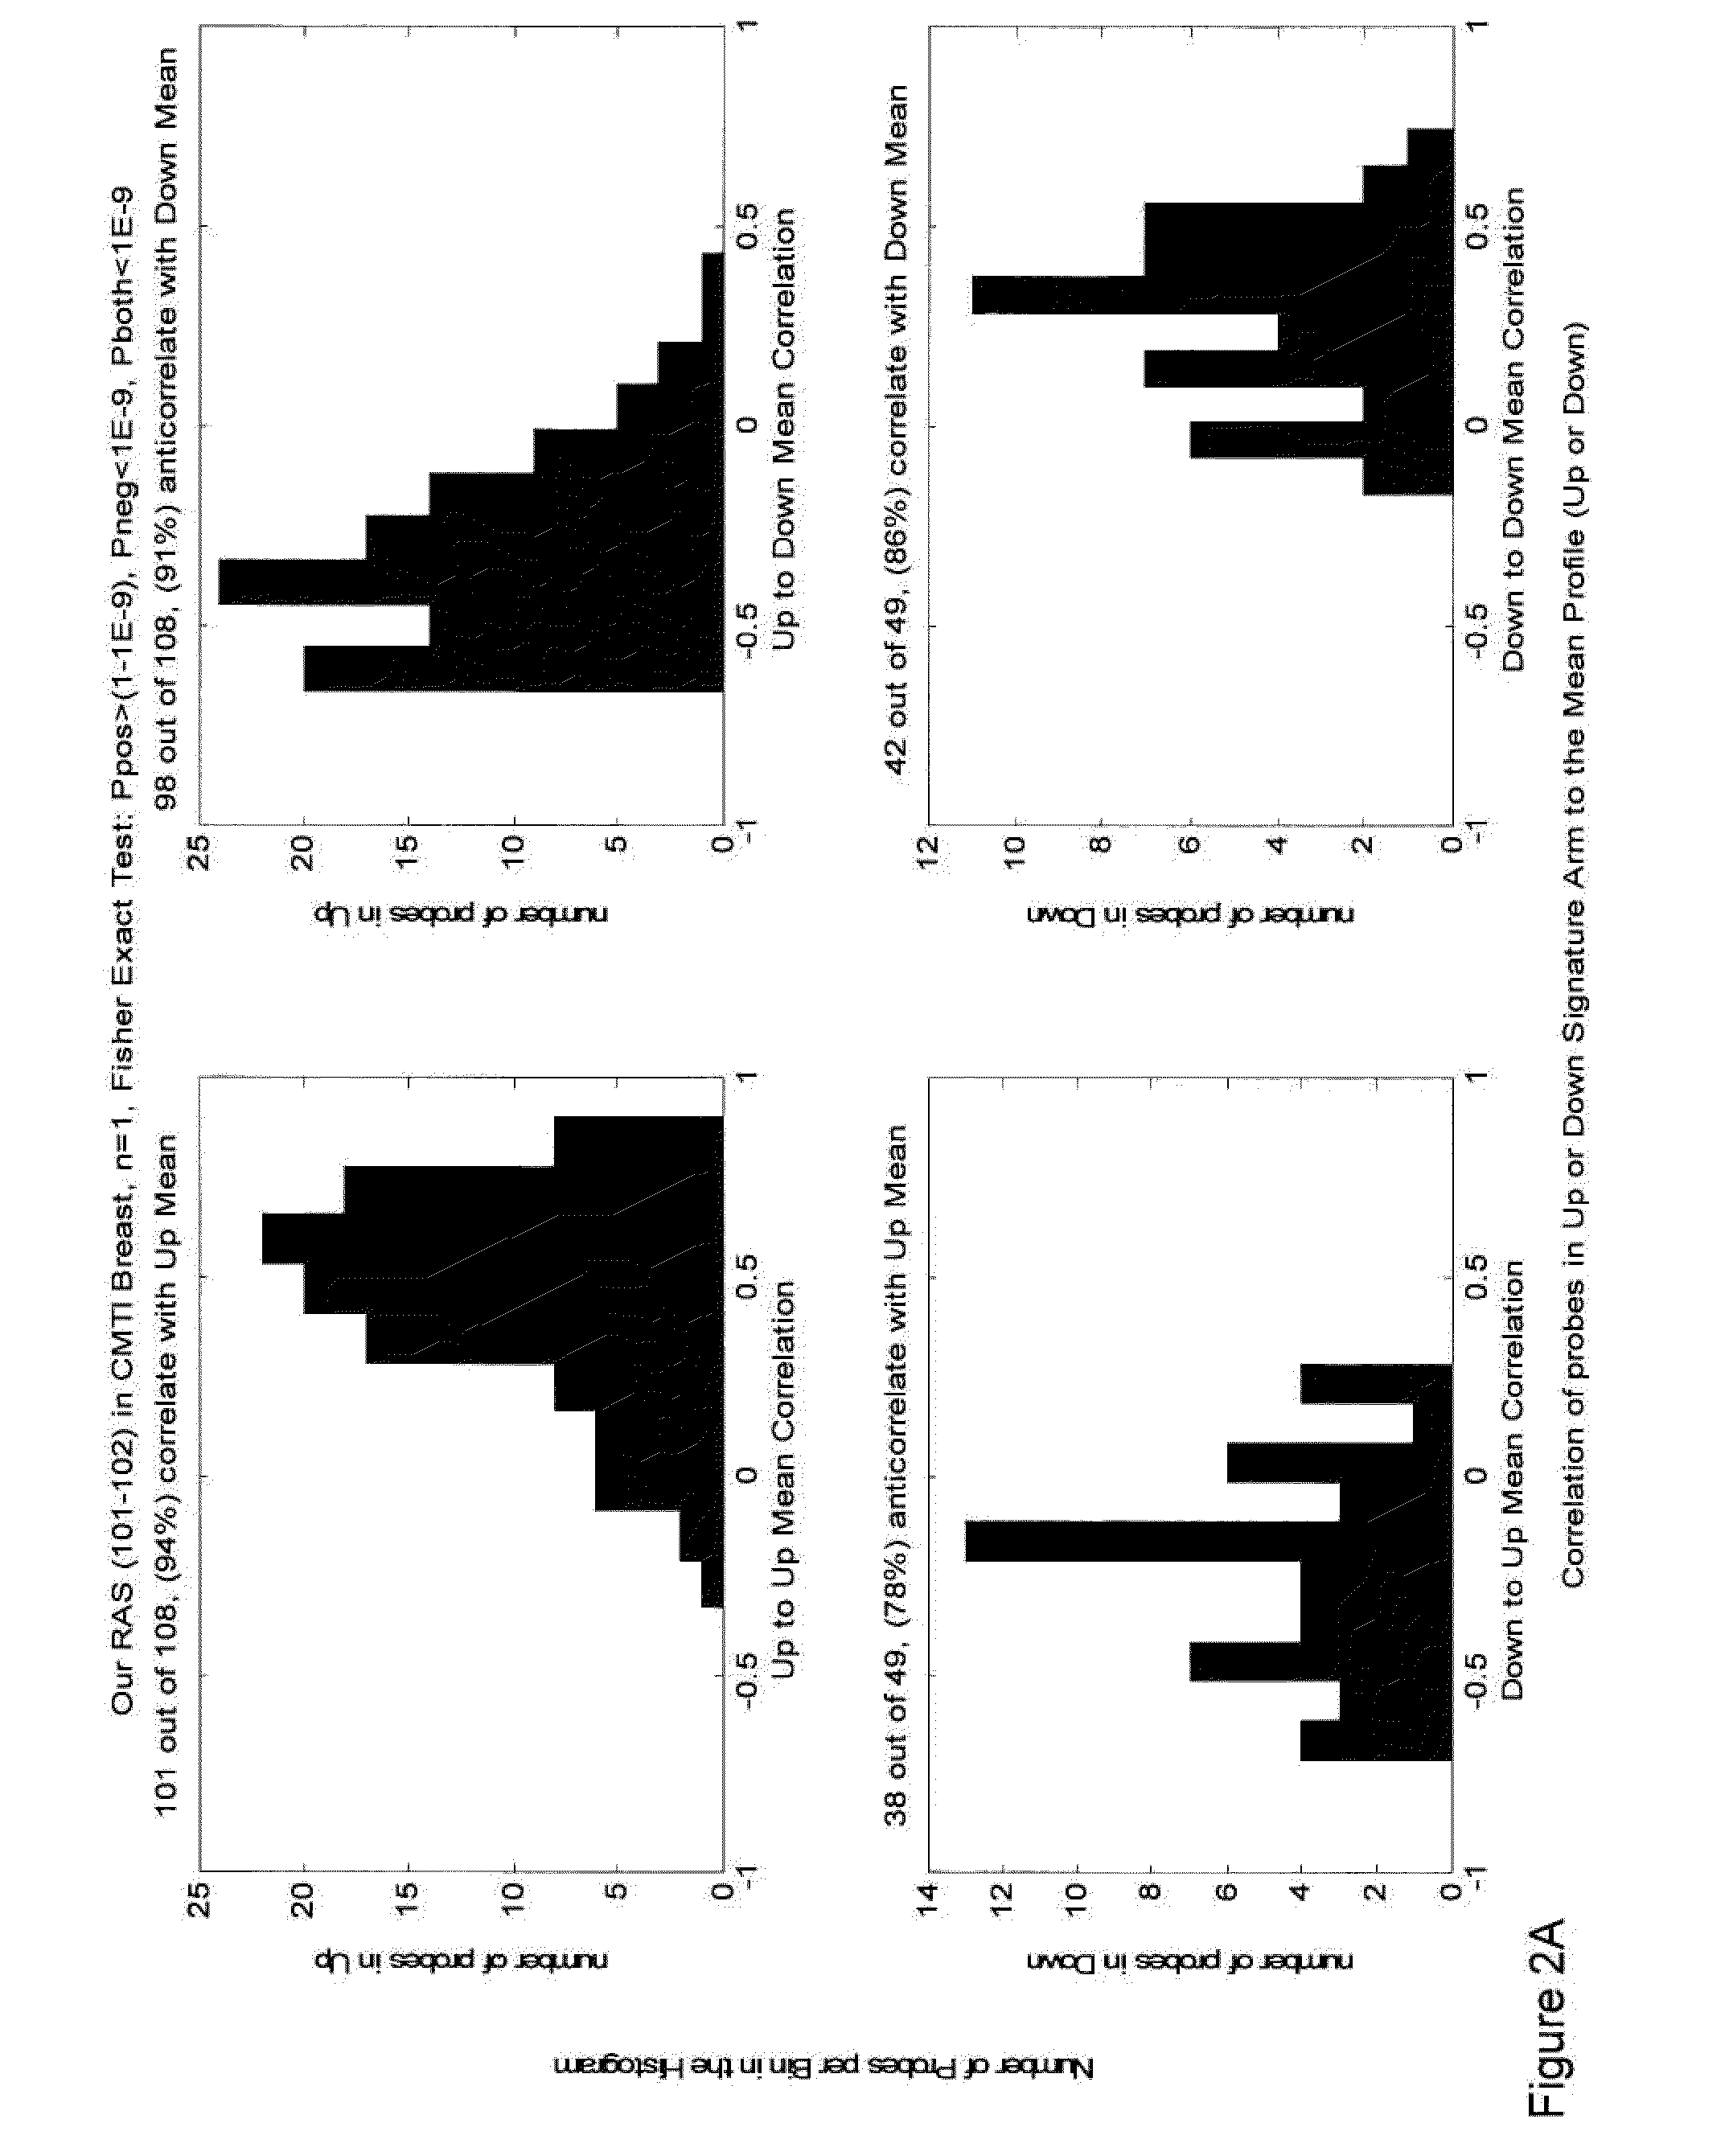 Methods and gene expression signature for assessing ras pathway activity